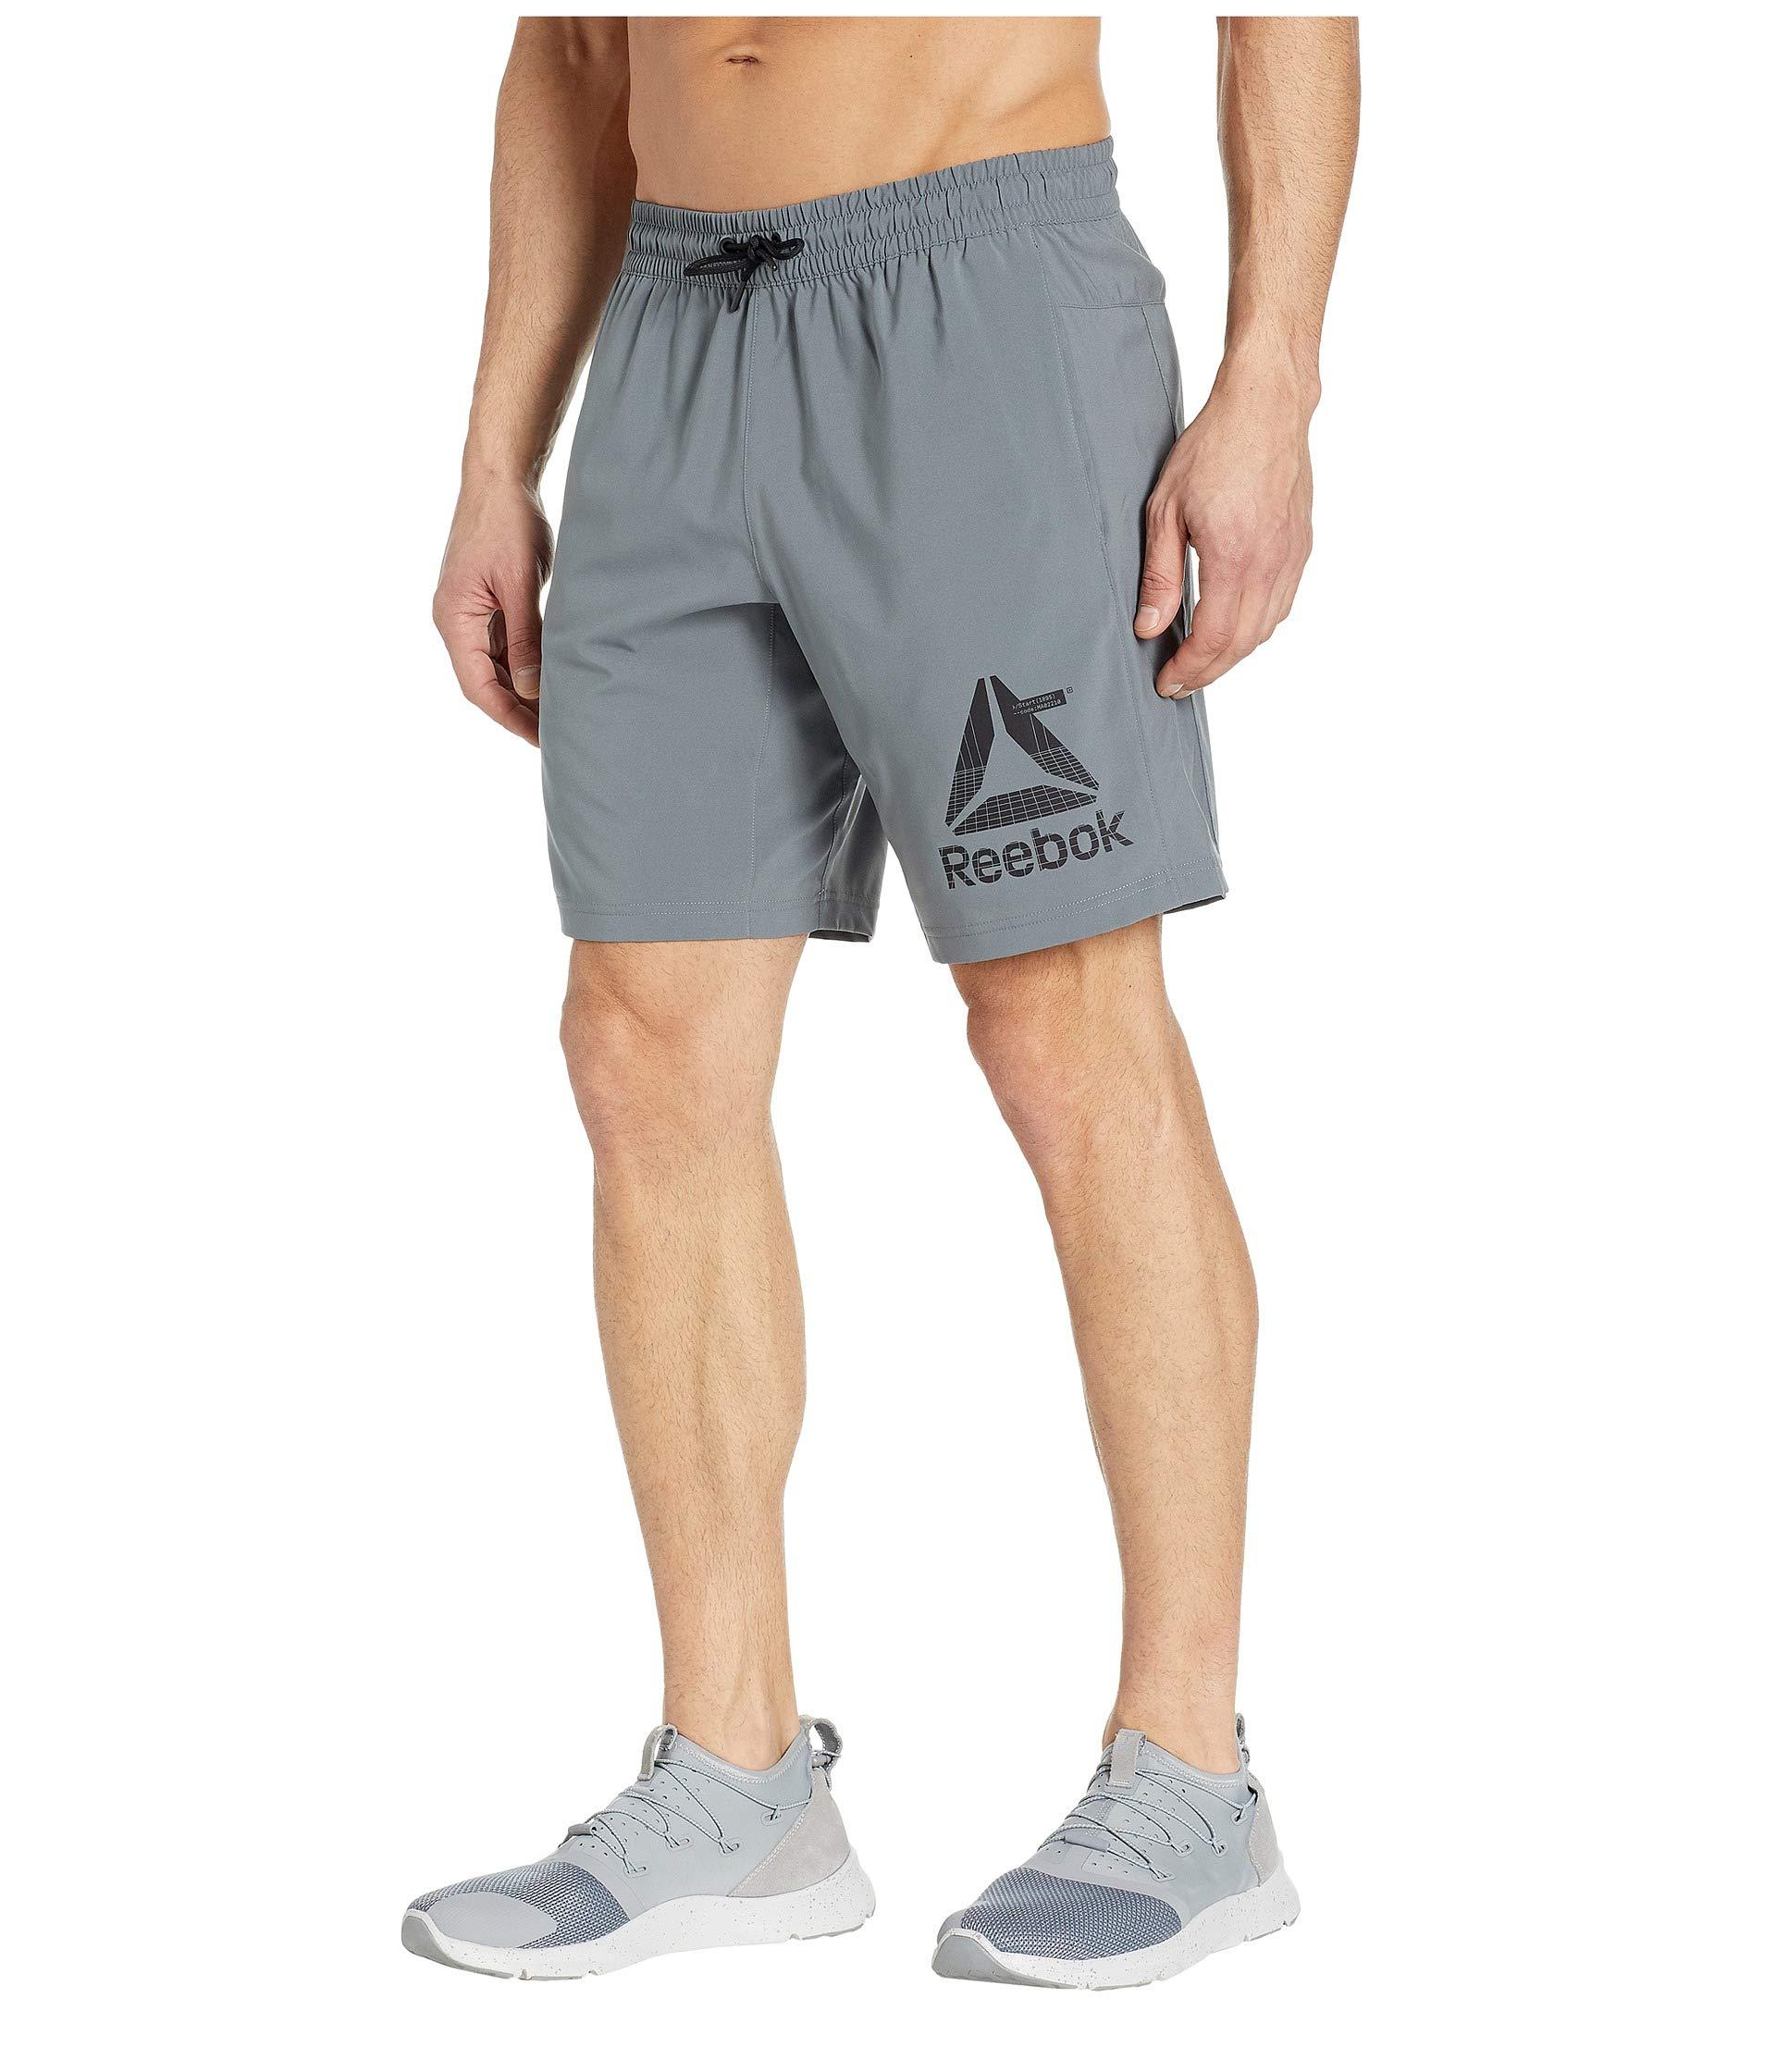 Reebok Workout Ready Woven Graphic Shorts in Gray for Men - Lyst